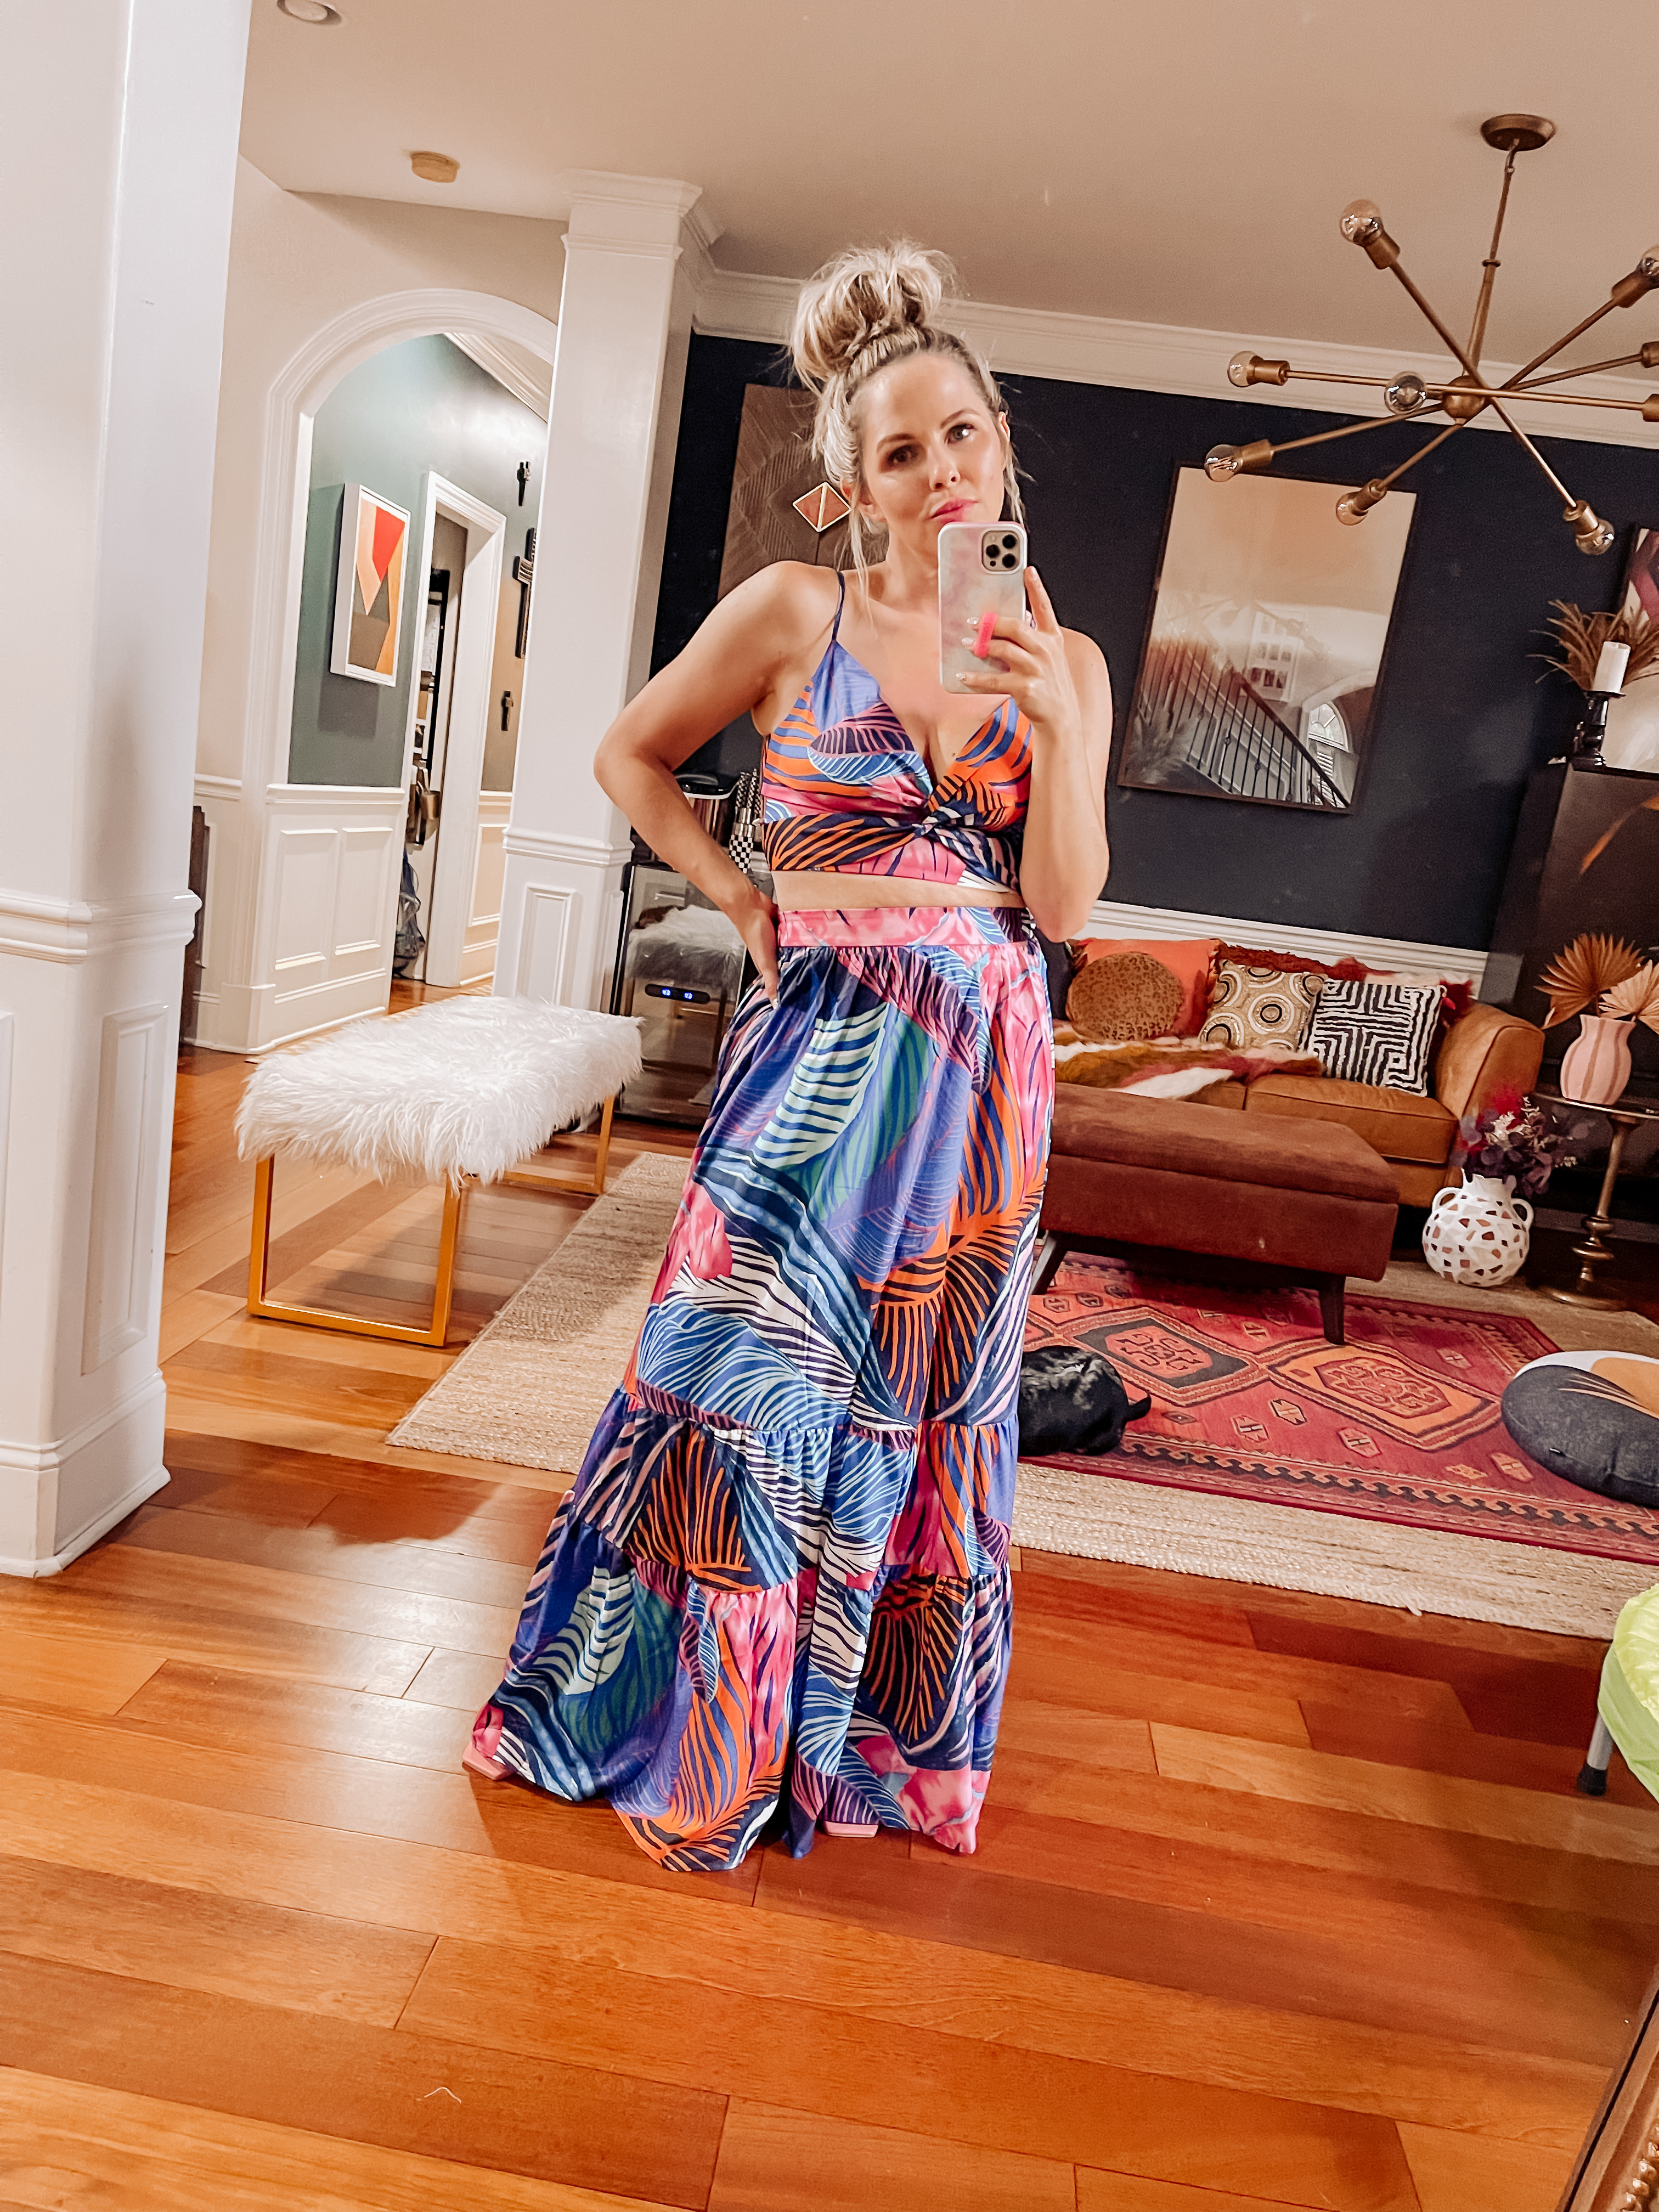 Top Nashville Lifestyle blogger, Nashville Wifestyles shares her Top Outfits to Wear on a Cruise Vacation! Click here to see her top picks!